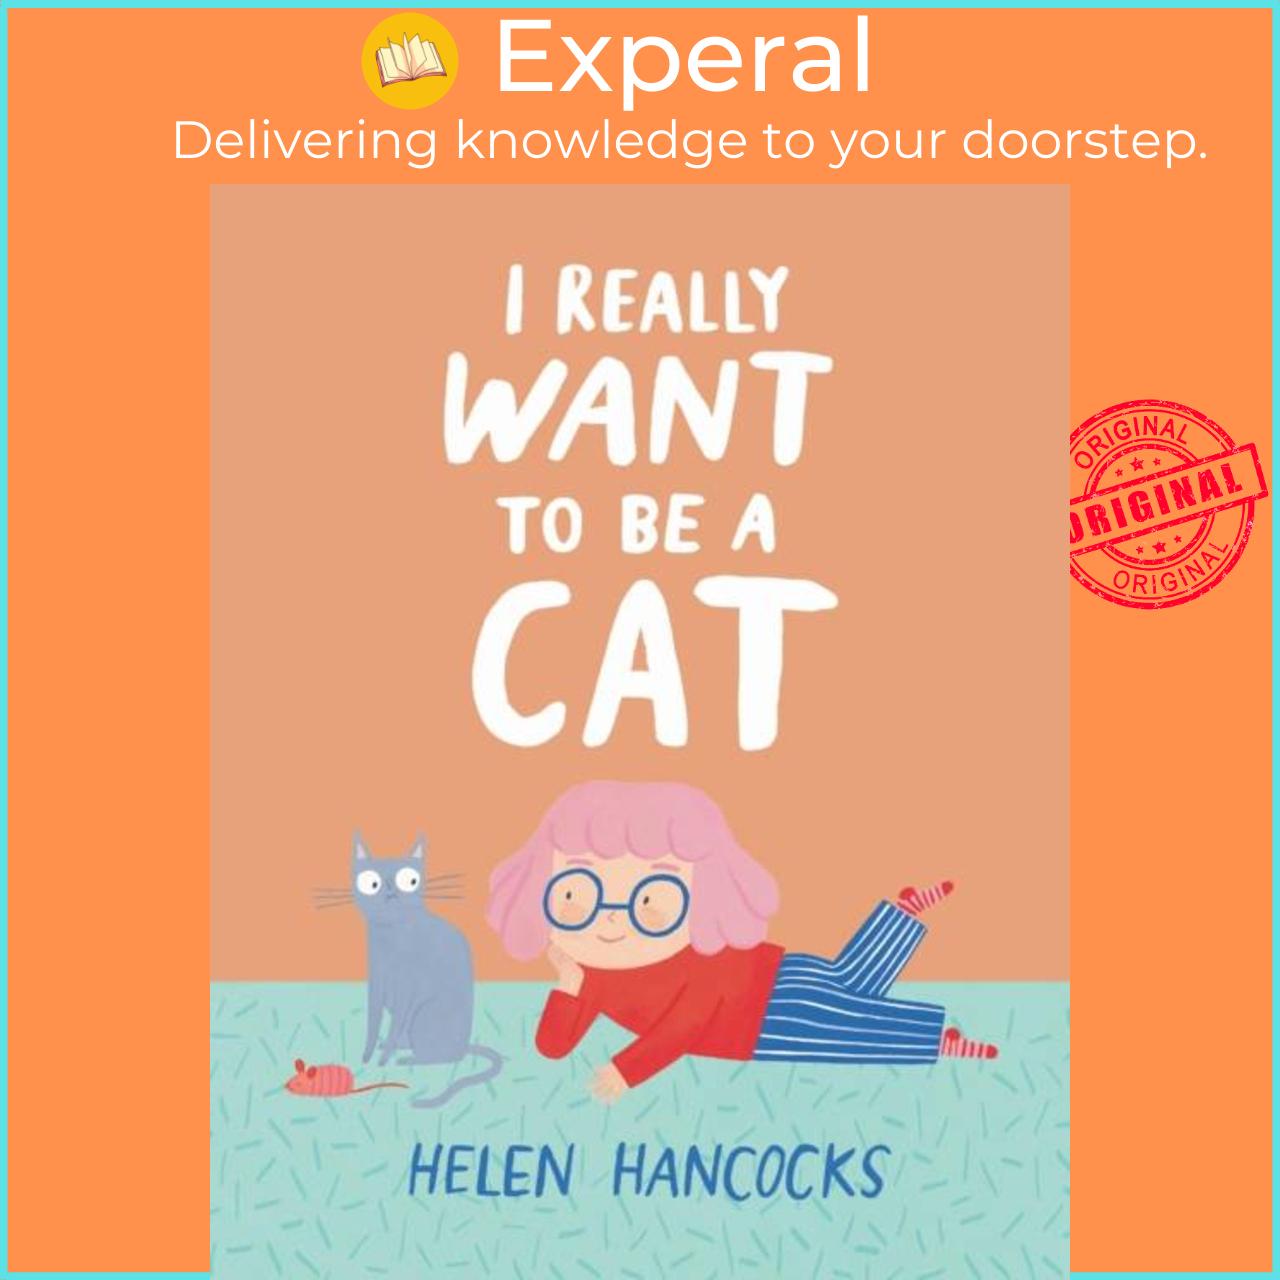 Sách - I Really Want To Be a Cat by Helen Hancocks (UK edition, hardcover)